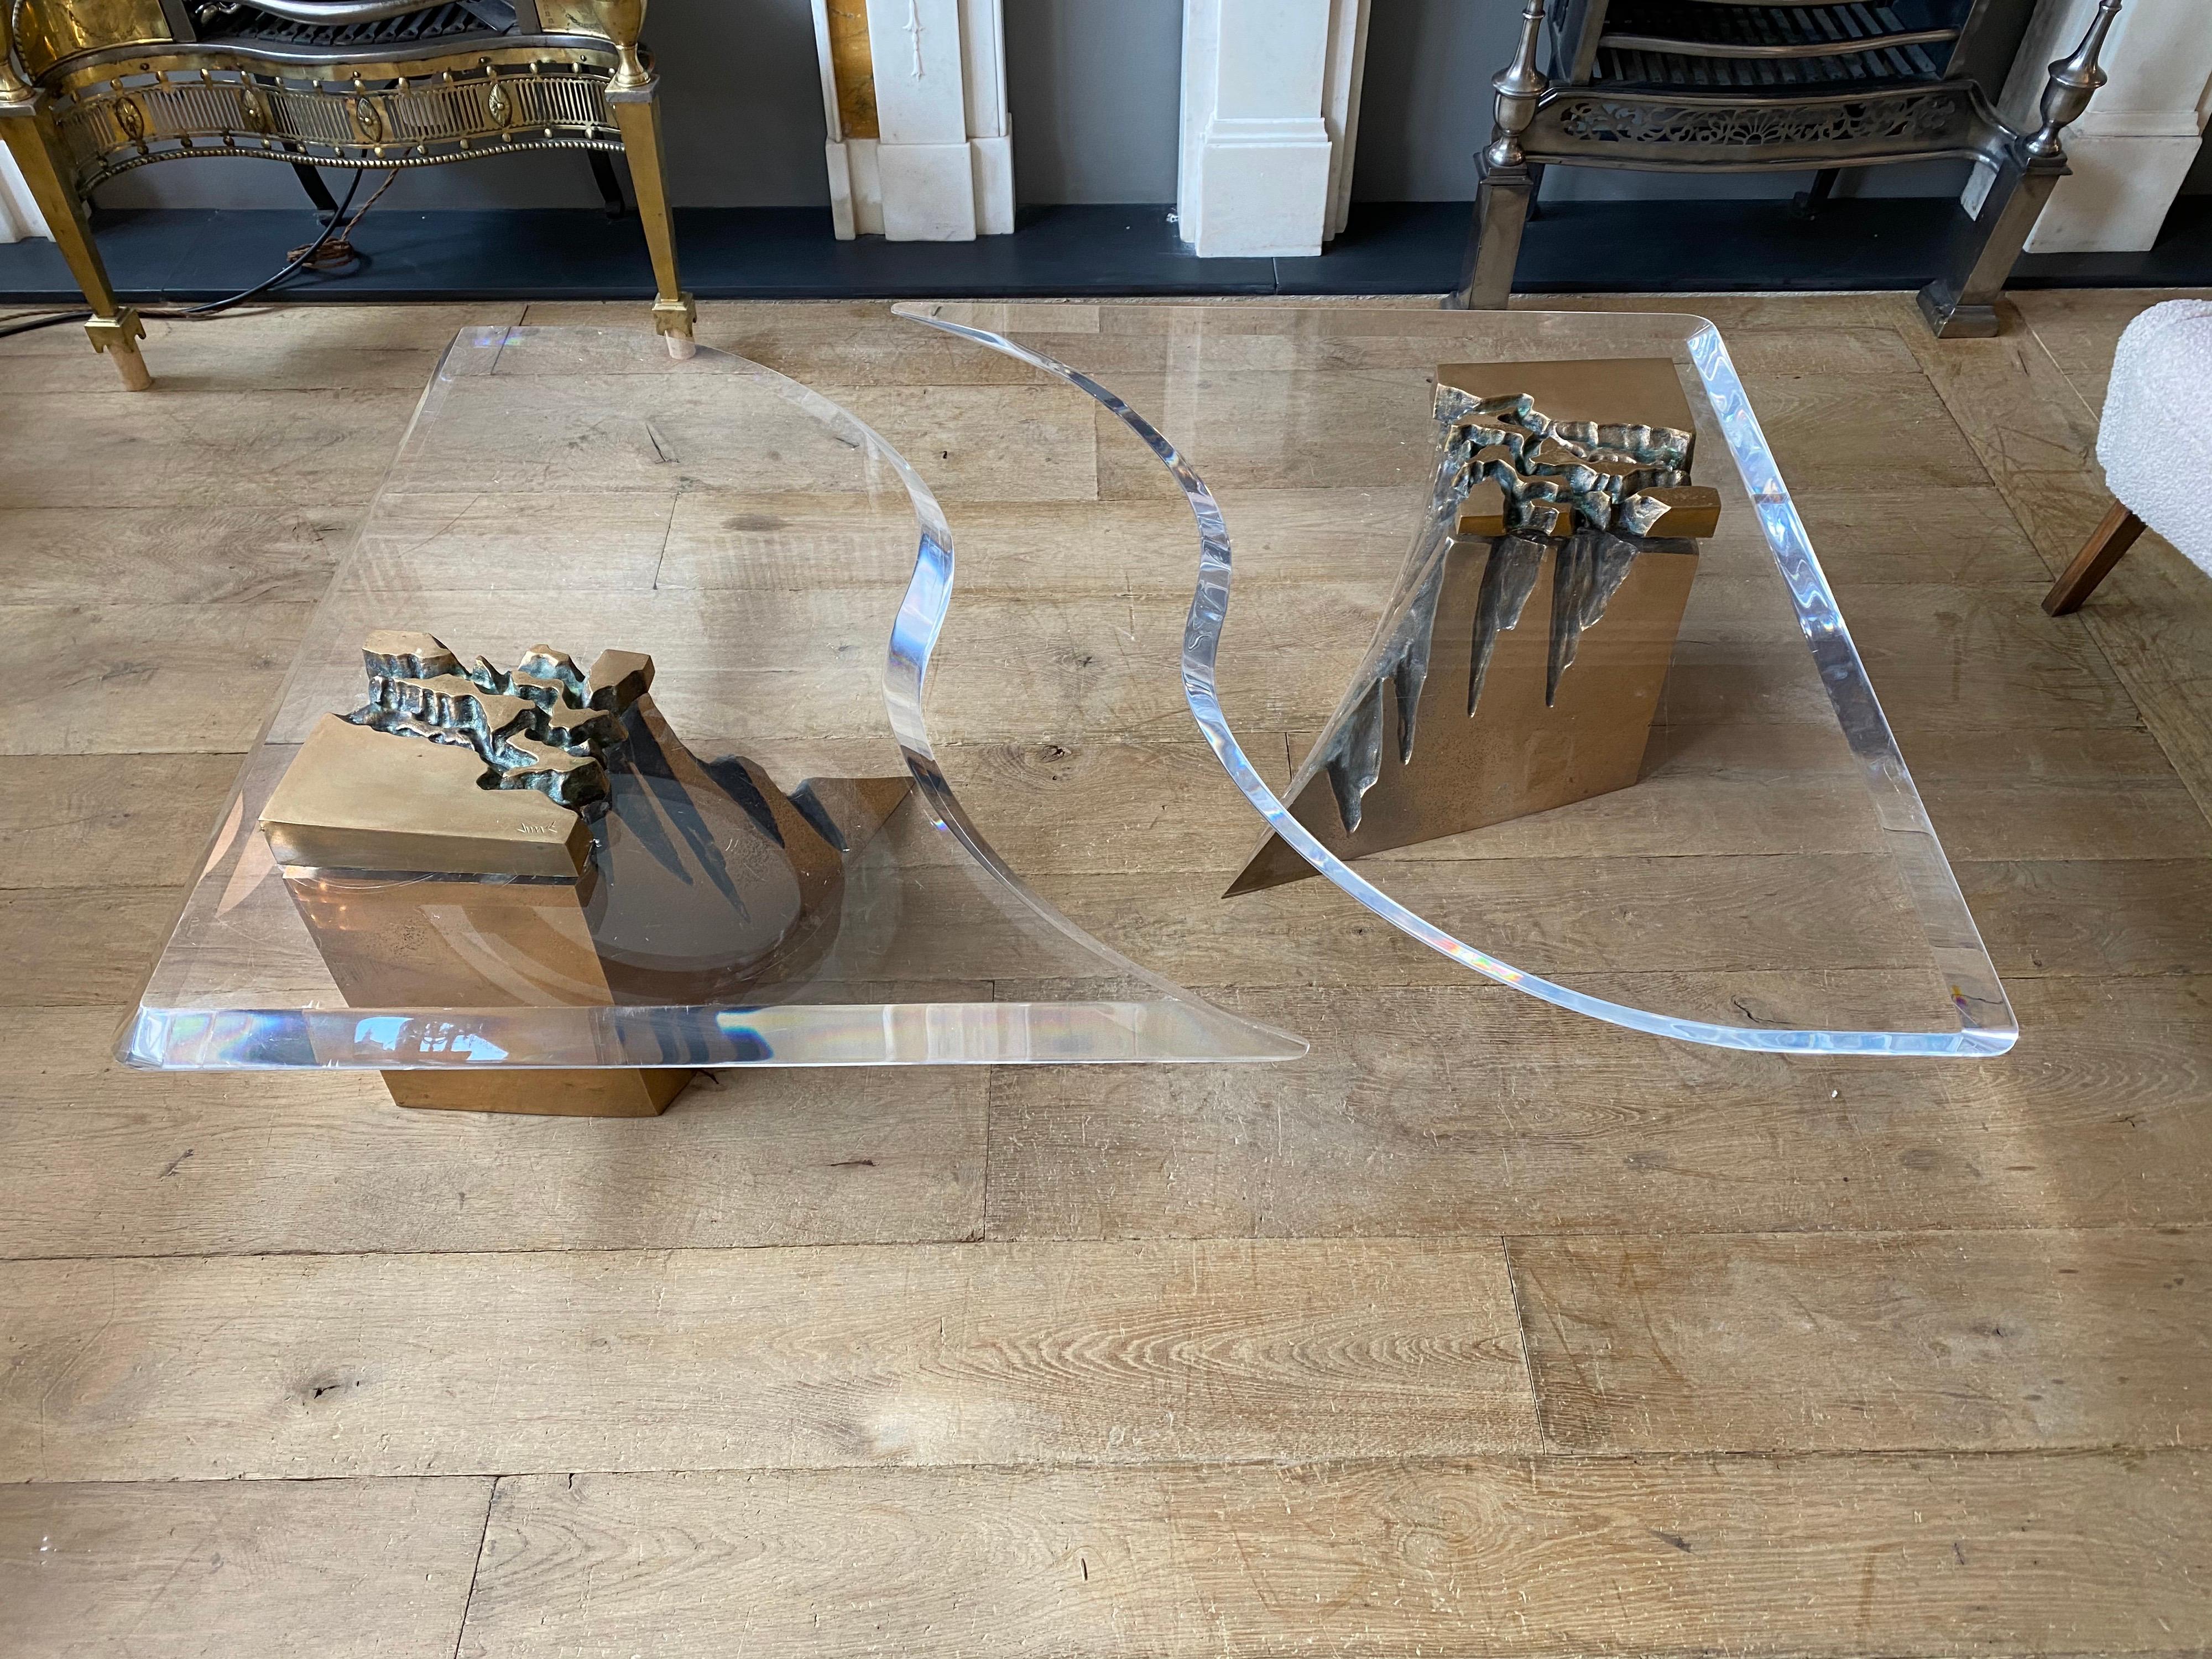 An unusual two-piece brass and Lucite coffee table, with moulded edge and curved shape with two organic cast brass supports signed by designer. Can be pushed together or separated as shown in images.